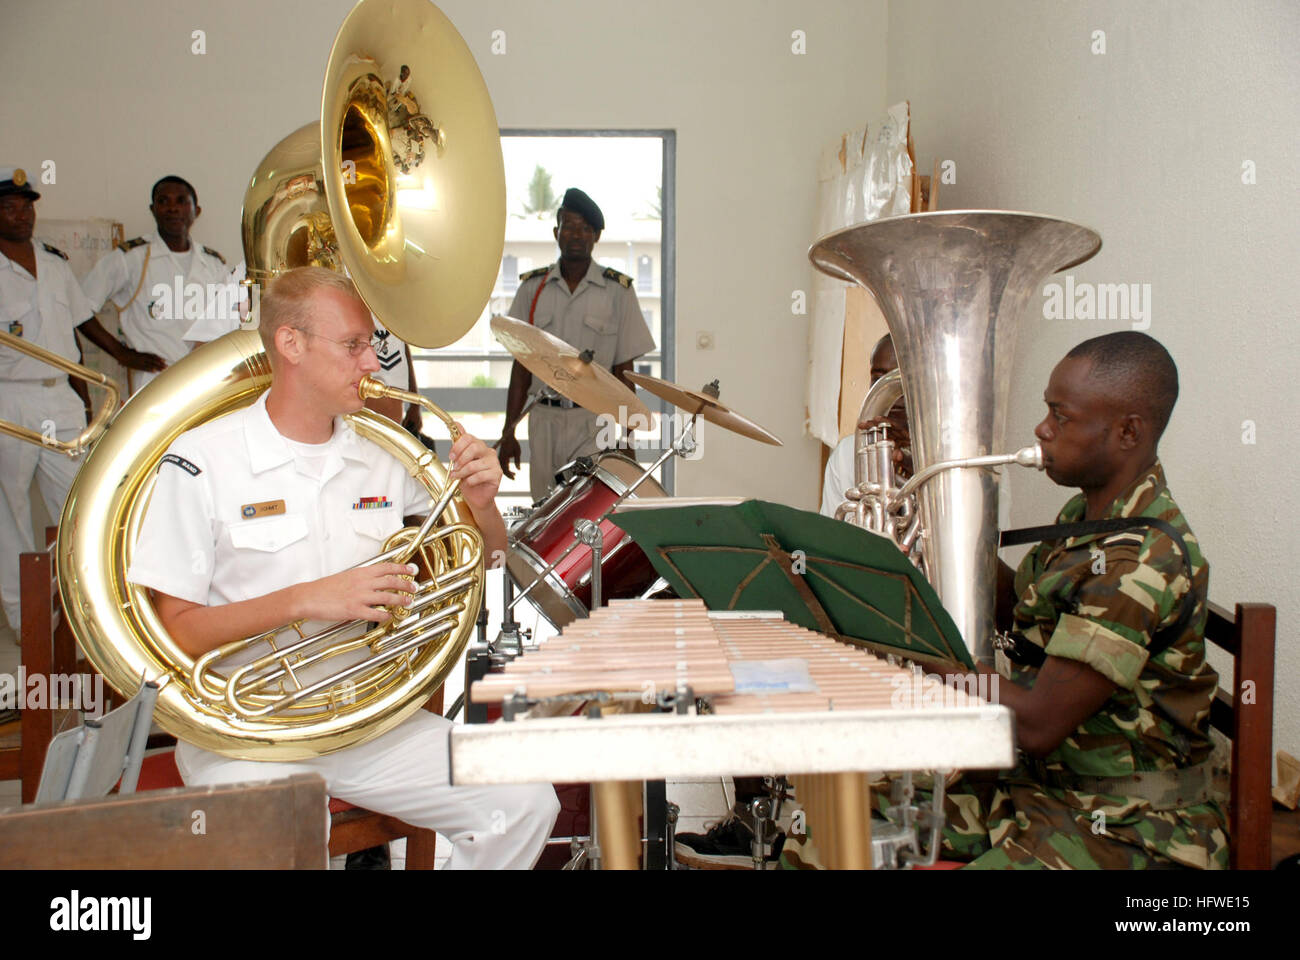 080915-N-6544L-480 LIBREVILLE, Gabon (Sept. 15, 2008) Sousaphone player Musician 3rd Class Nick Schmit, left, and Gabonese Army tuba player Sgt. Minko Gontran play together at the Prytanee School during a community relations project. The Commander, U.S. Naval Forces Europe brass quintet exchanged music with their Gabonese counterparts and played for students at the school as part of the Africa Sports Diplomacy Tour, which aims to improving understanding and developing goodwill between the U.S. and its partner nations in West and Central Africa. (U.S. Navy photo by Mass Communication Specialist Stock Photo